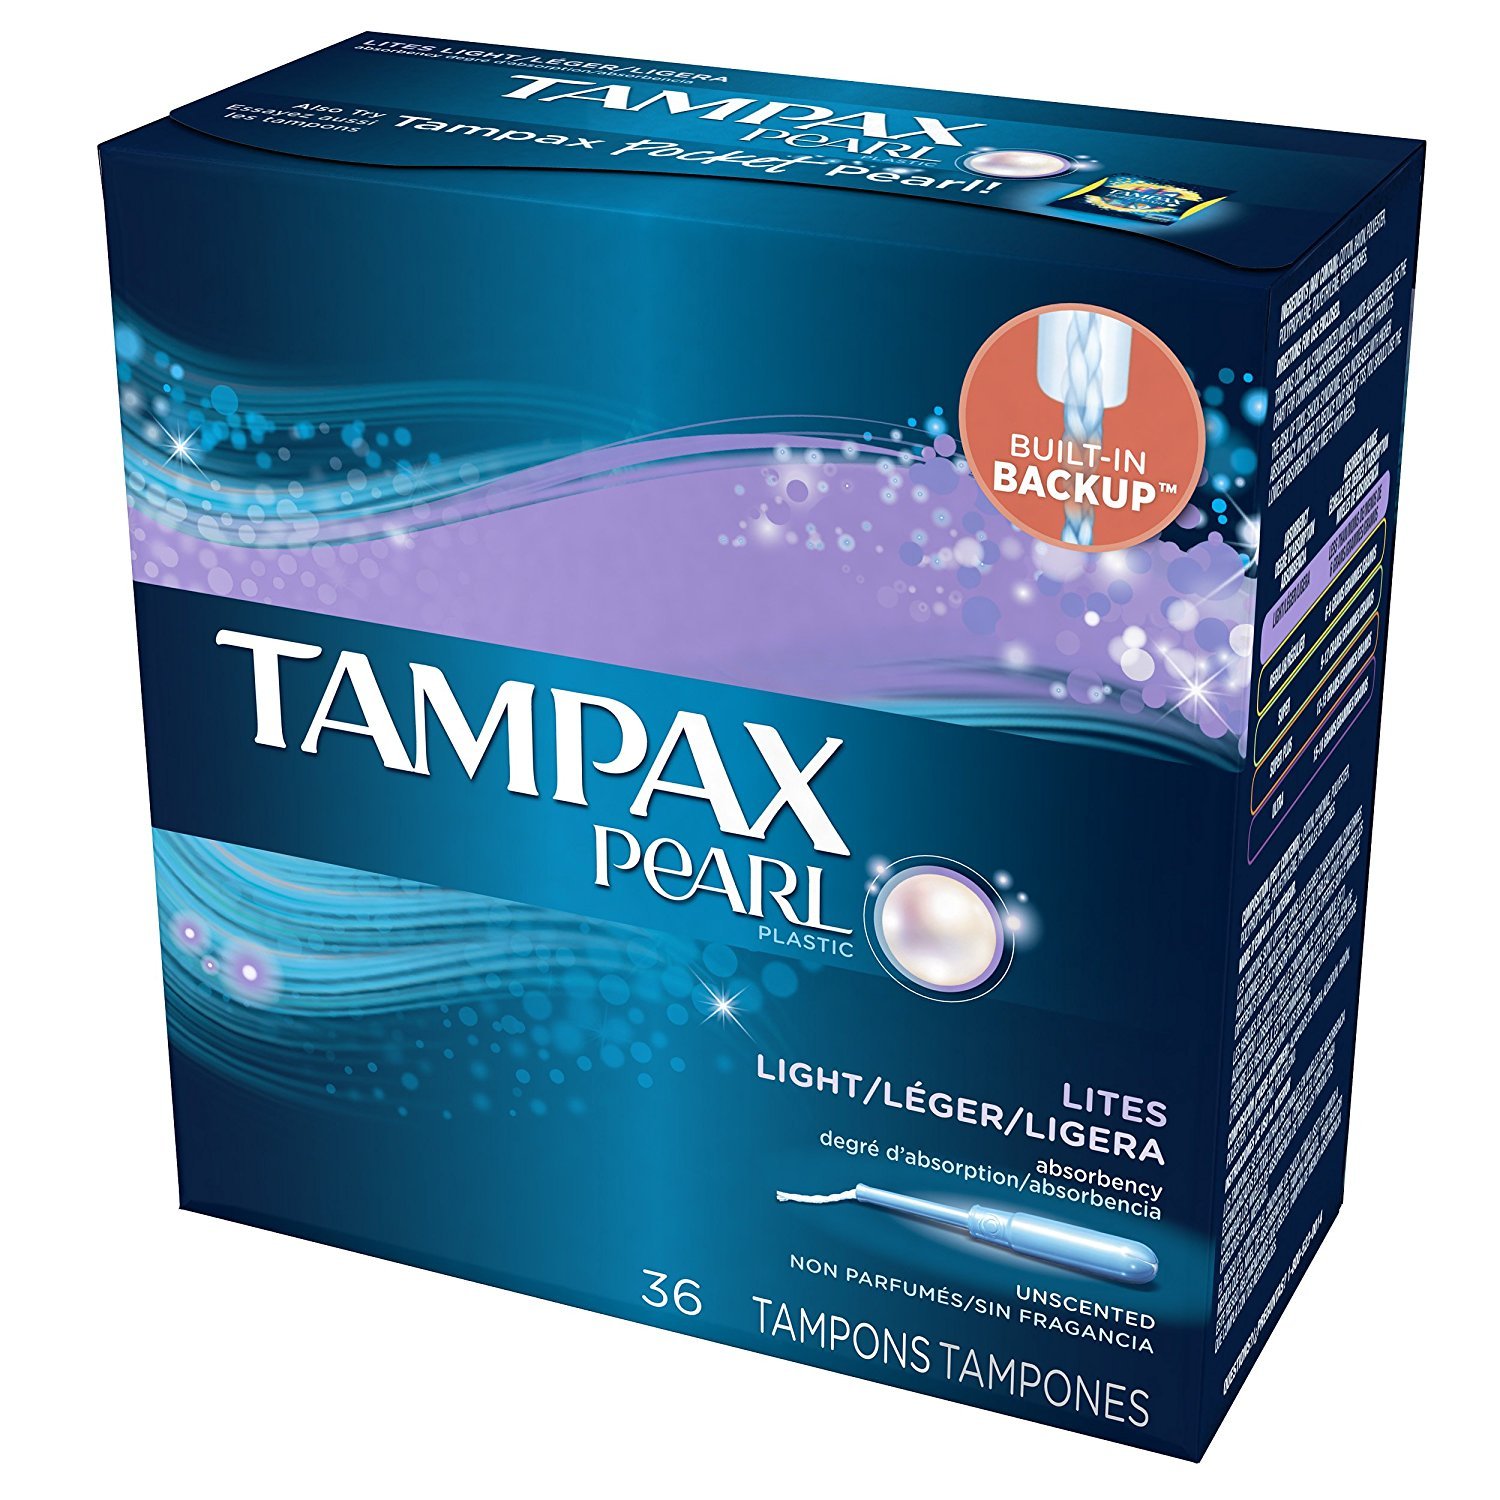 Tampax Product from Procter & Gamble Company (P&G)